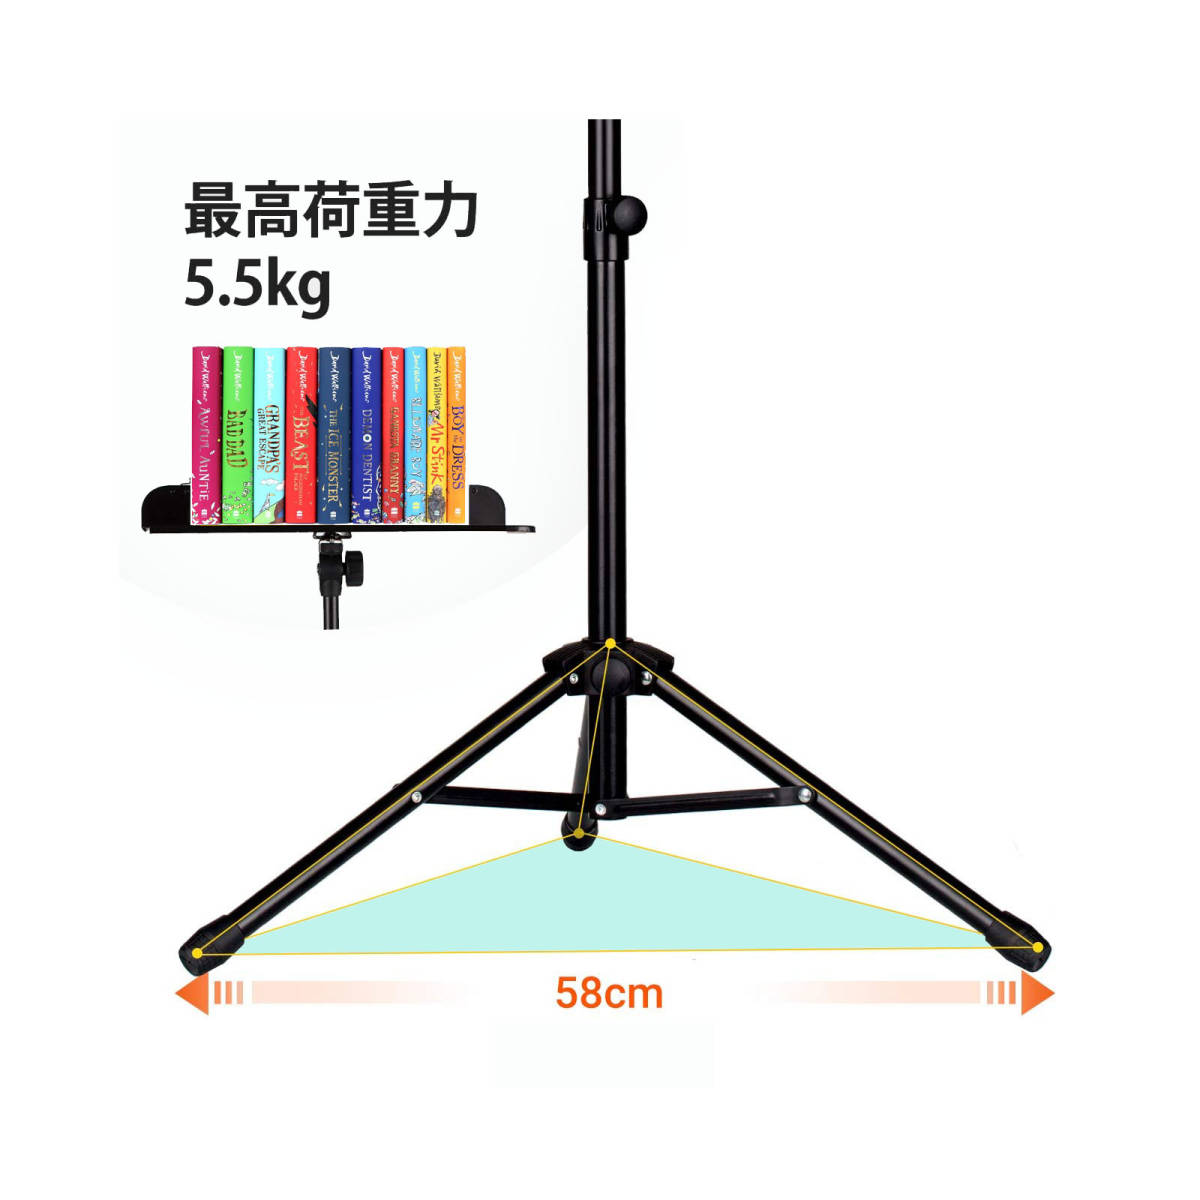  music stand height 170cm angle adjustment possibility mat black musical performance . presentation 